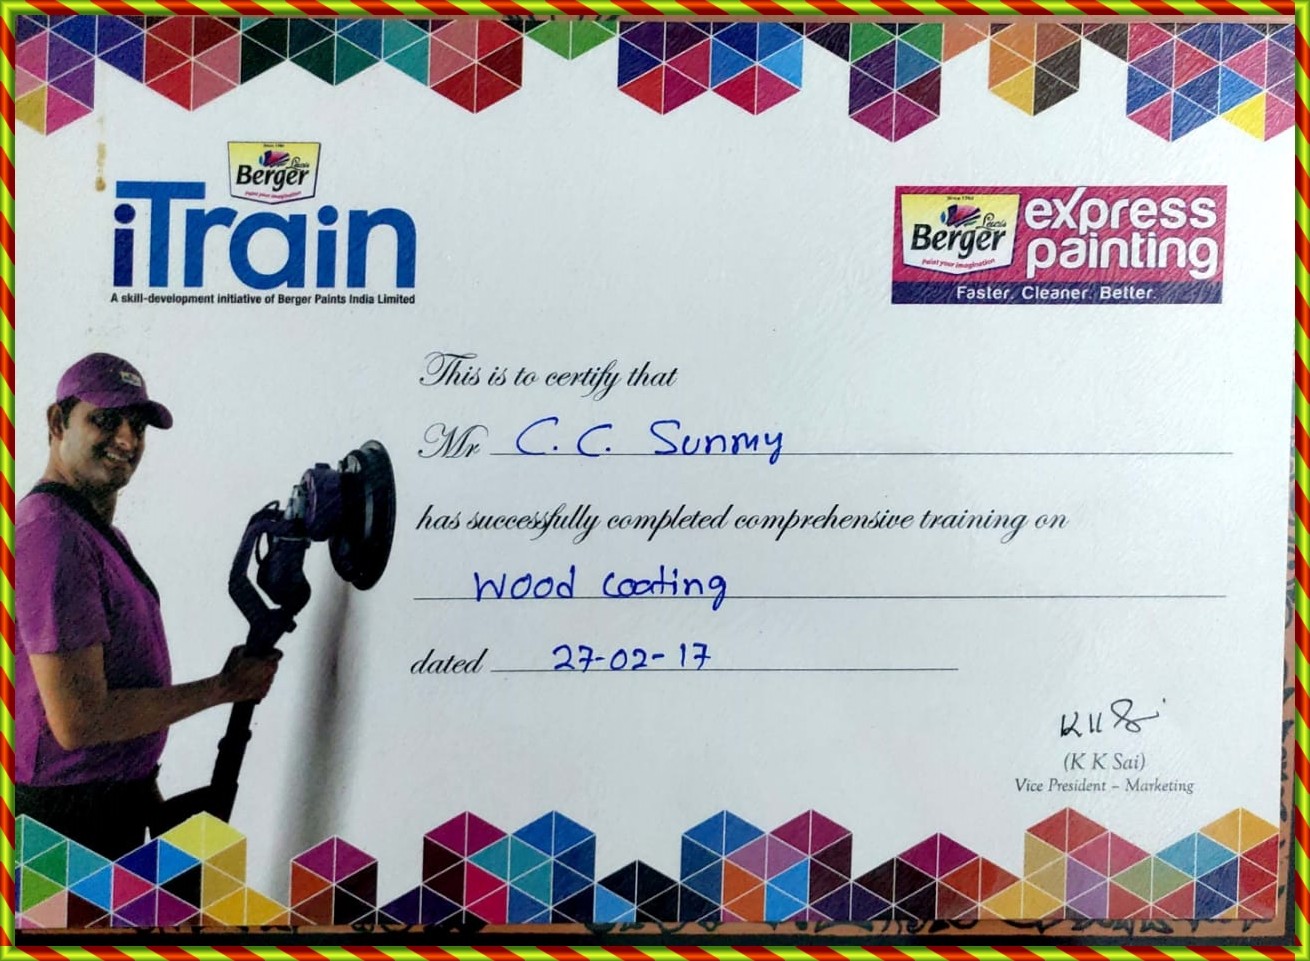 Wood Coating Training Certificate at iTrain